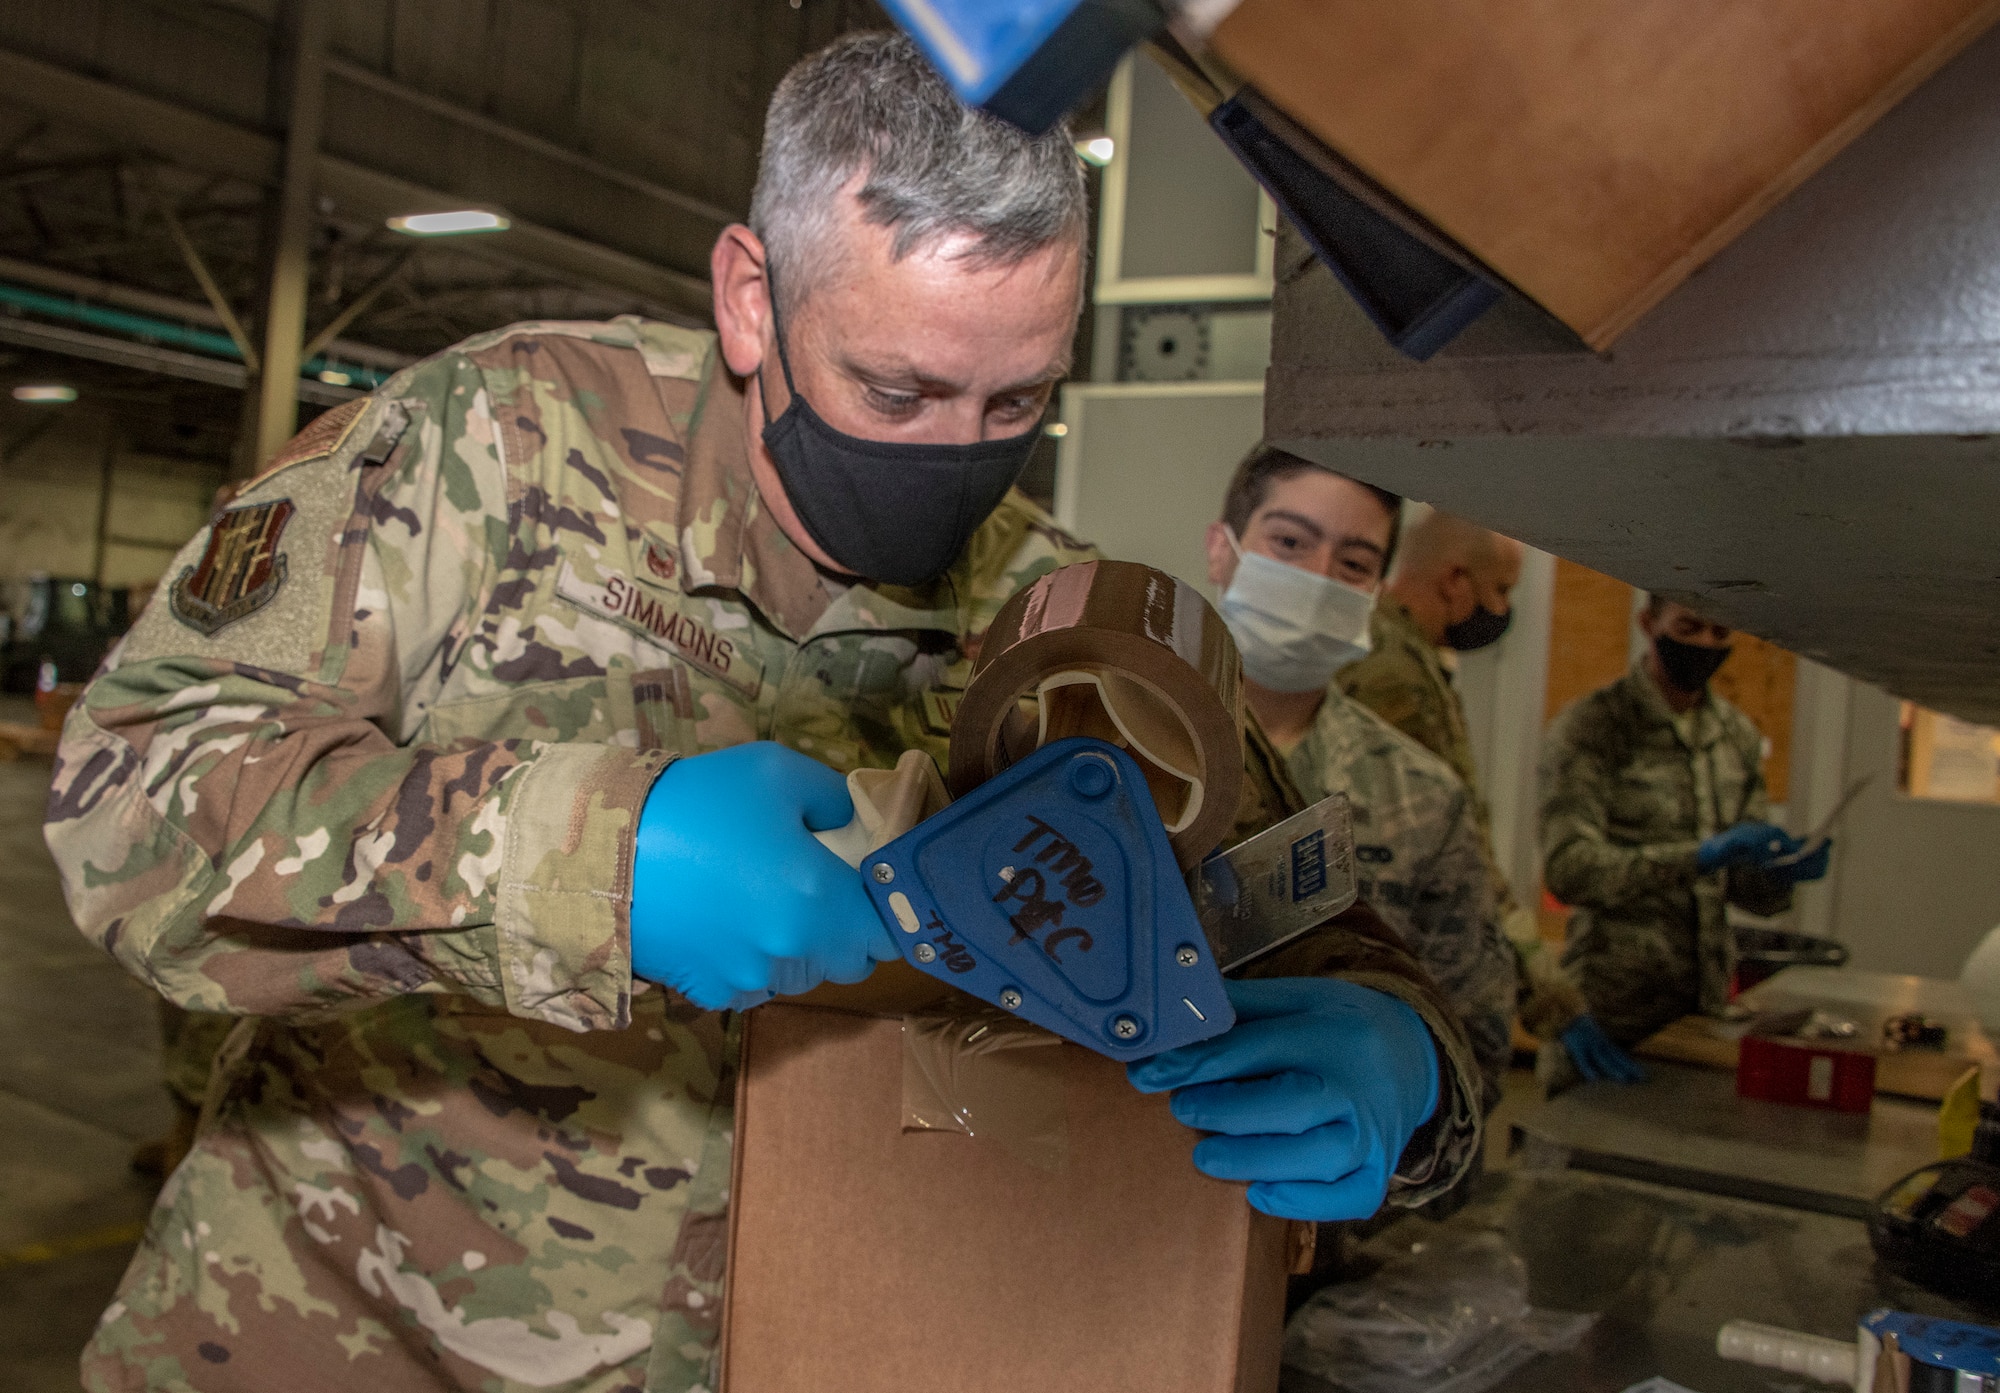 U.S. Air Force Col. Corey Simmons, left, 60th Air Mobility Wing commander, tapes up a shipment box as Airman 1st Class Gregory Concilla, 60th Aerial Port Squadron packing and crating technician, watches during Leadership Rounds July 24, 2020, at Travis Air Force Base, California. The 60th APS is the United States Transportation Command's primary west coast aerial port providing global and passenger distribution for the United States and its Allies. The Leadership Rounds program provides 60th AMW leadership an opportunity to interact with Airmen and get a detailed view of each mission performed at Travis AFB. (U.S. Air Force photo by Heide Couch)